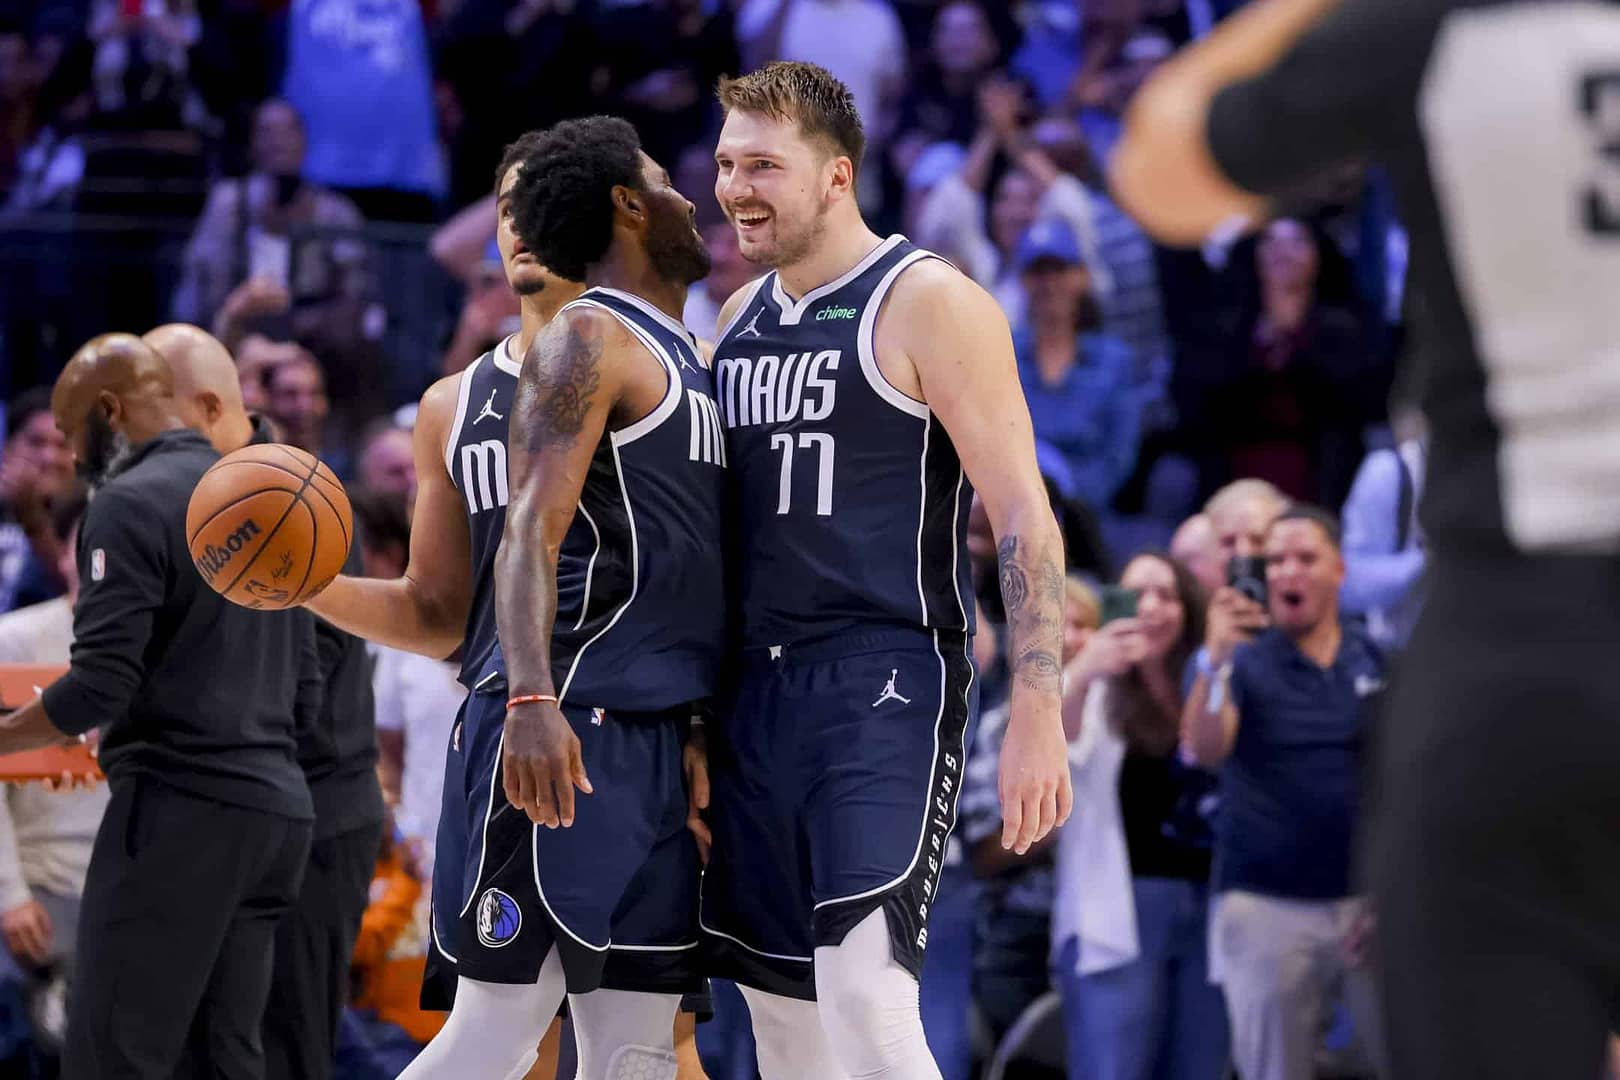 The Dallas Mavericks MUST Figure Out This Defensive Flaw vs. the Oklahoma City Thunder in our Game 1 Reactions & Game 2 Preview...